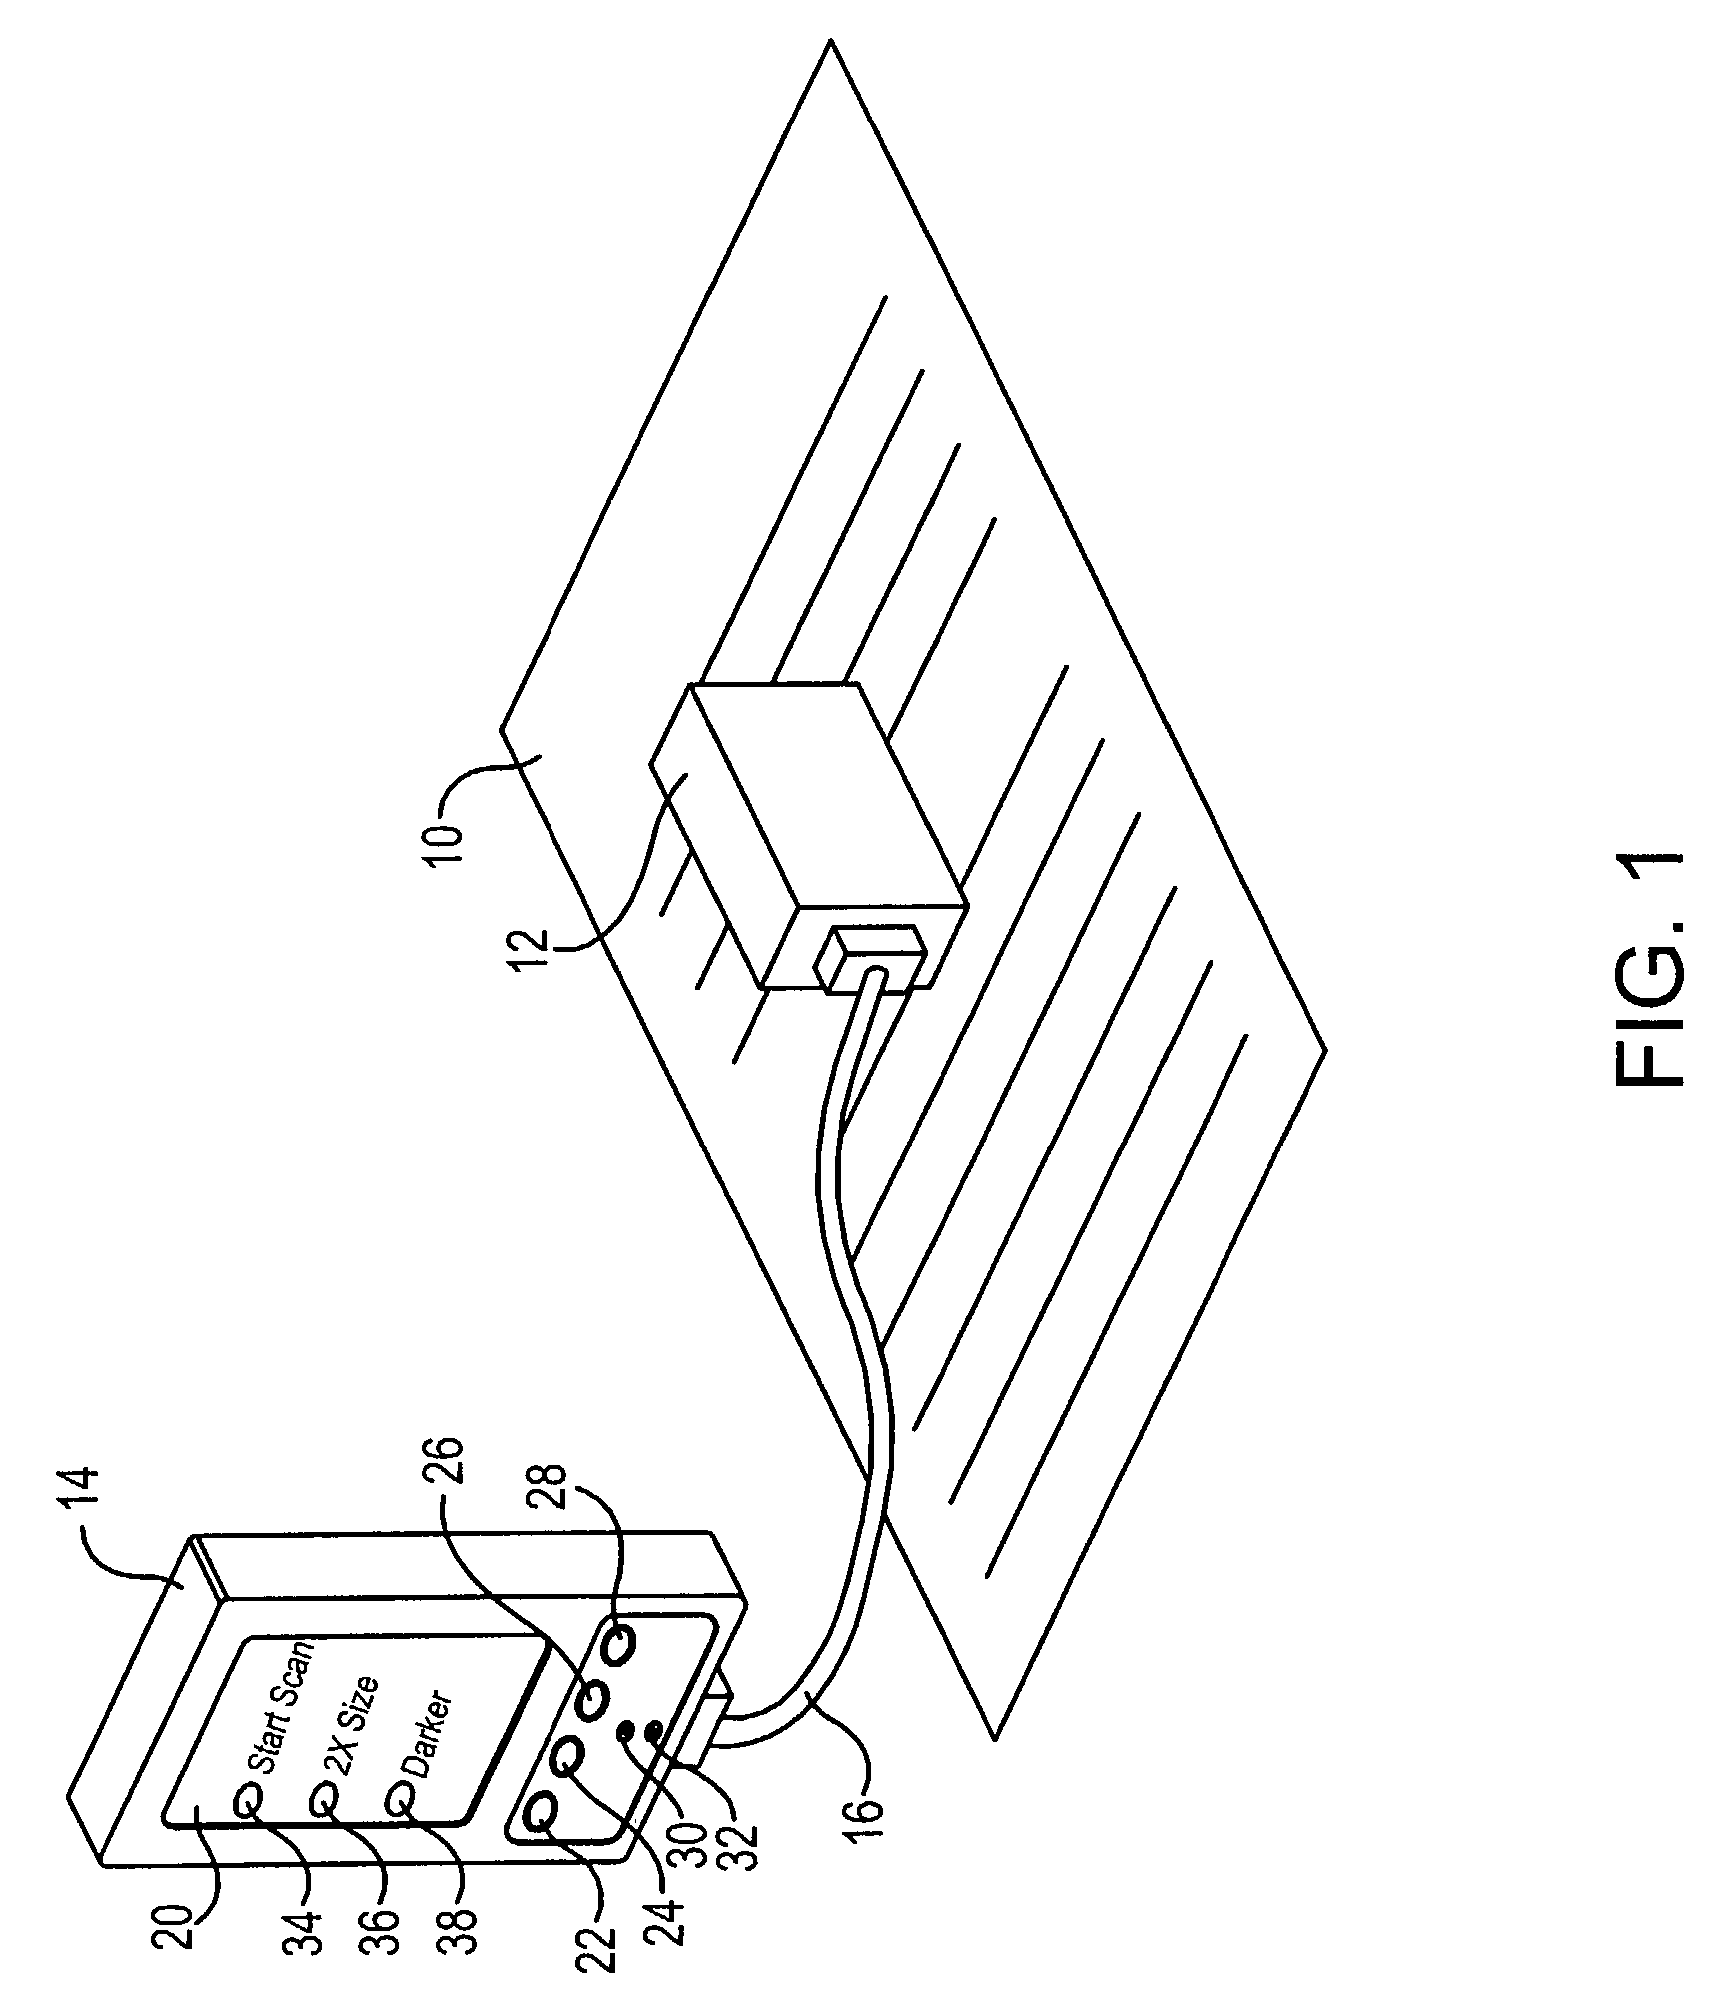 Portable document scan accessory for use with a wireless handheld communications device